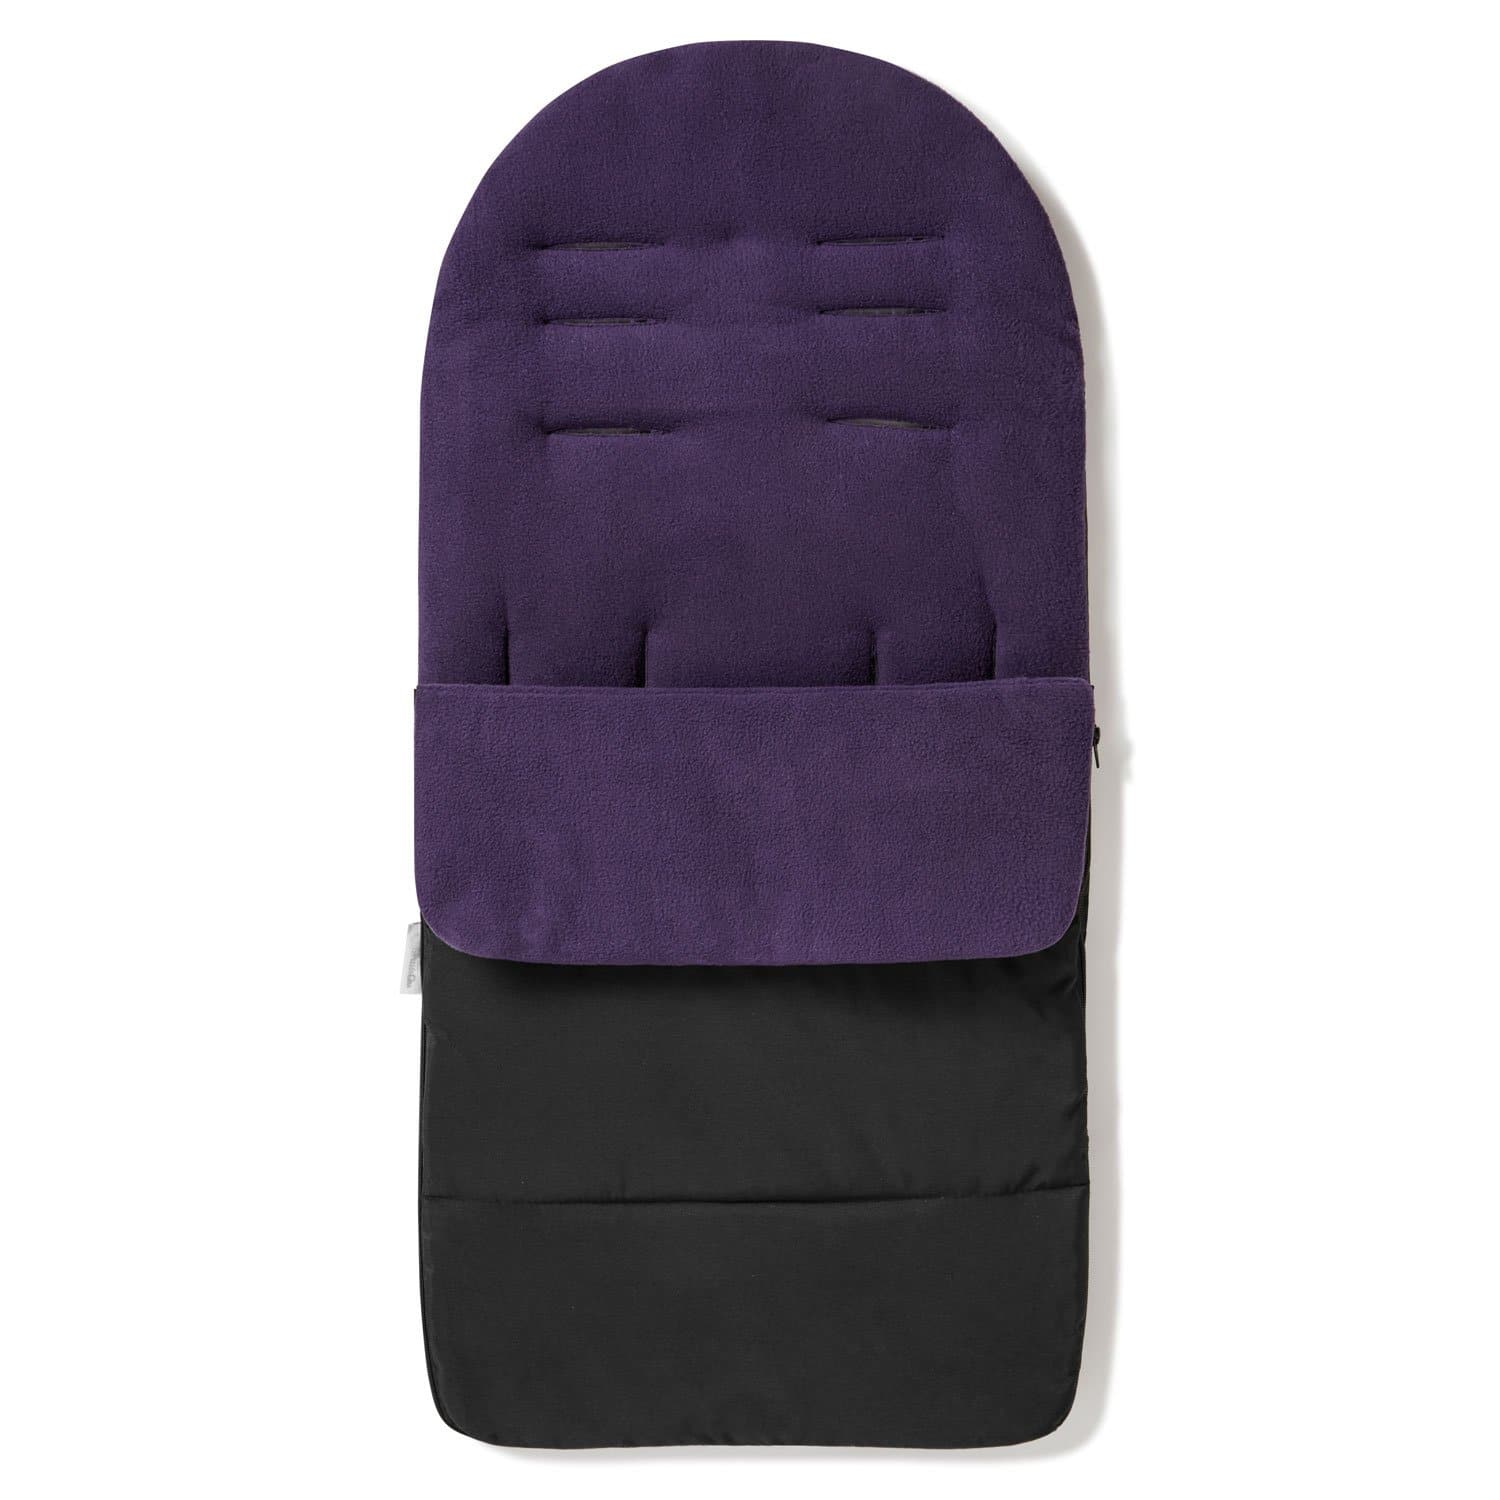 Premium Footmuff / Cosy Toes Compatible with Easywalker - Plum Purple / Fits All Models | For Your Little One